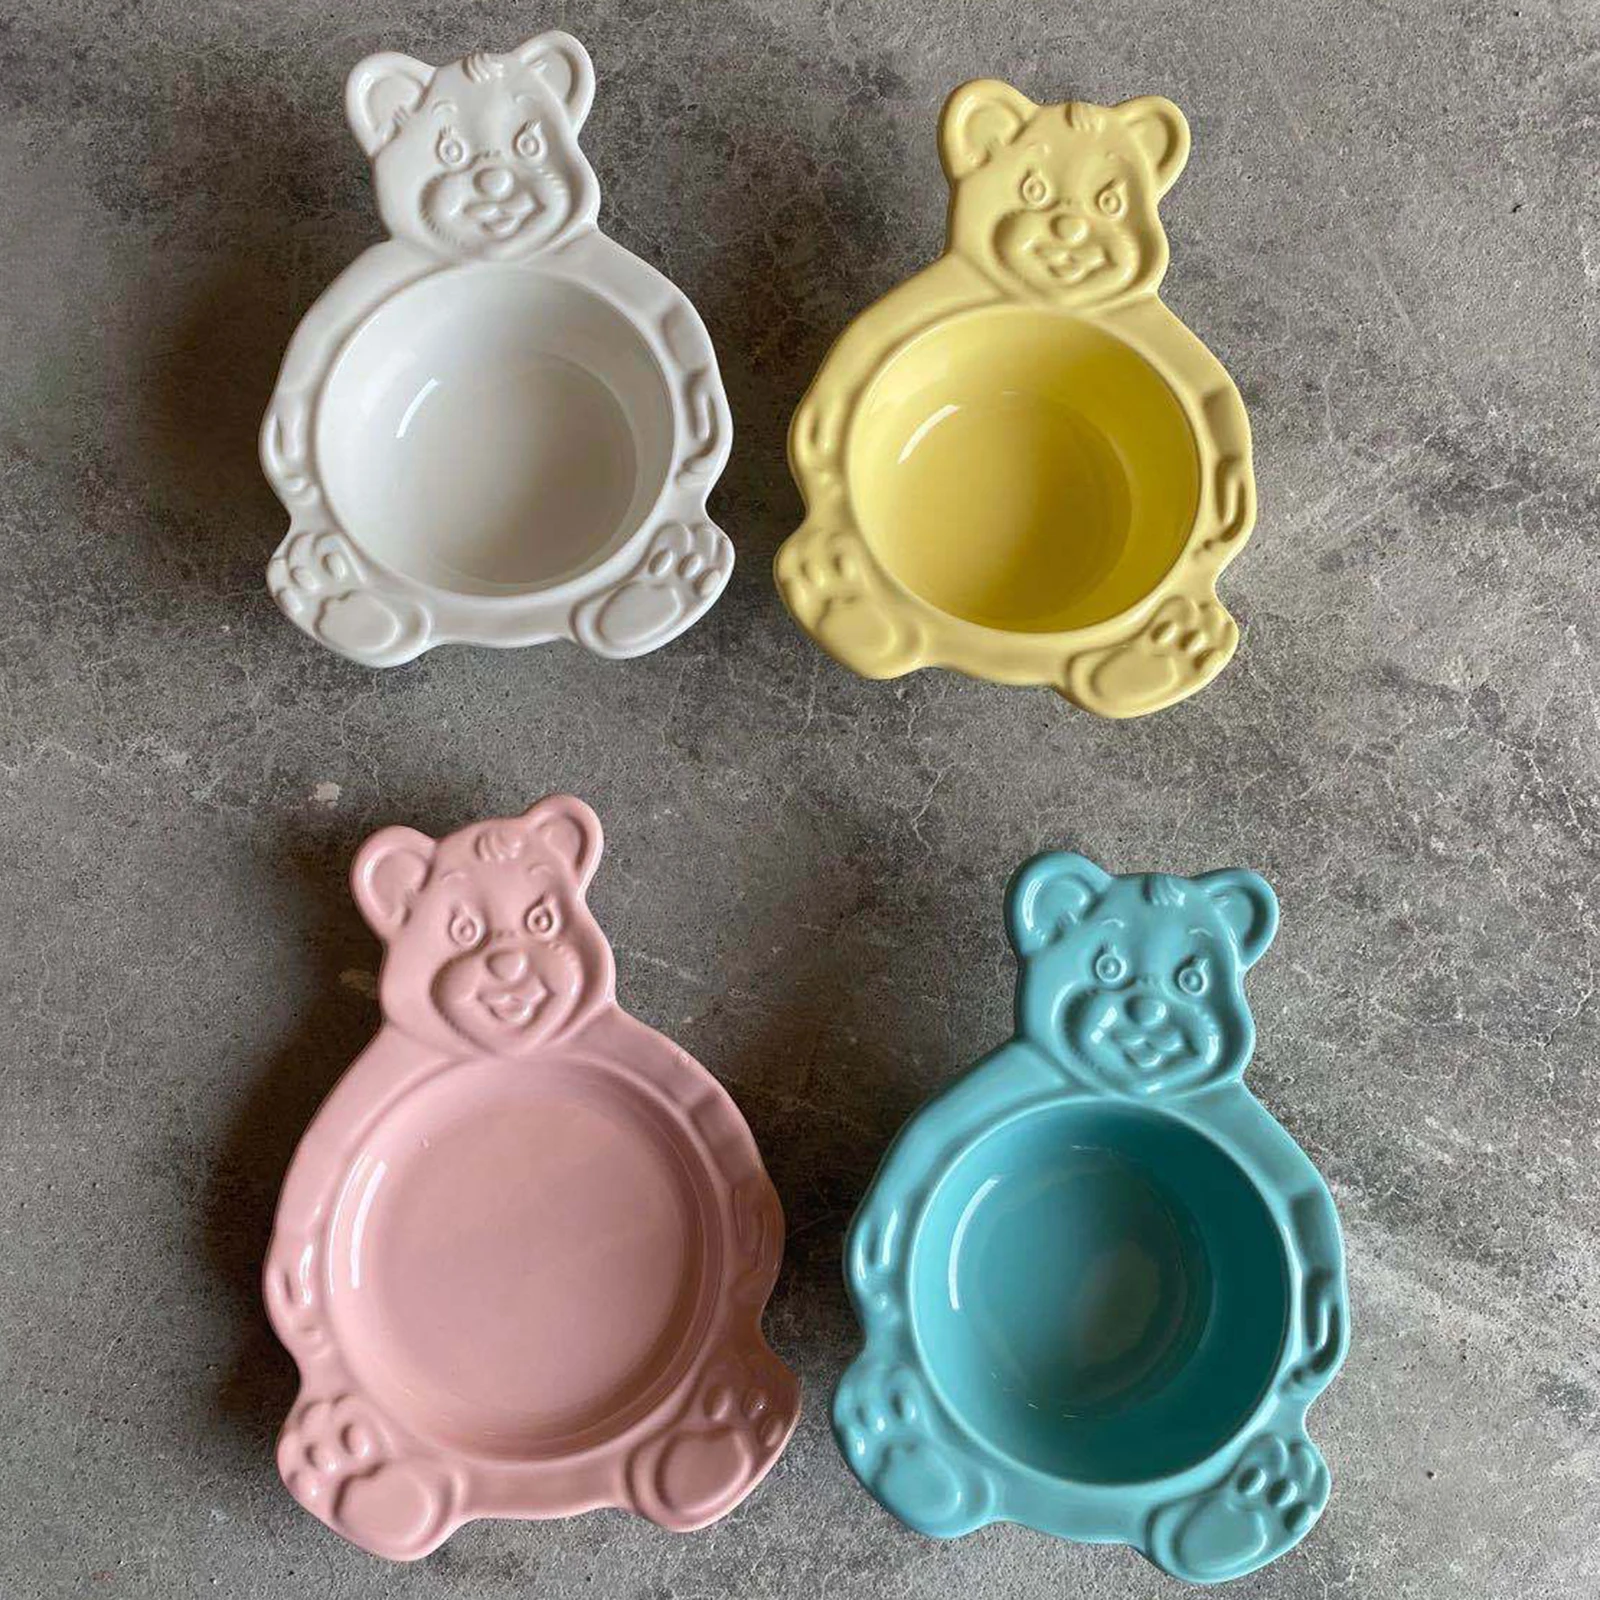 Cute Ceramic Bowl Cereal Bowls Bear-shaped Ins Oatmeal Dinner Bowls Utensils